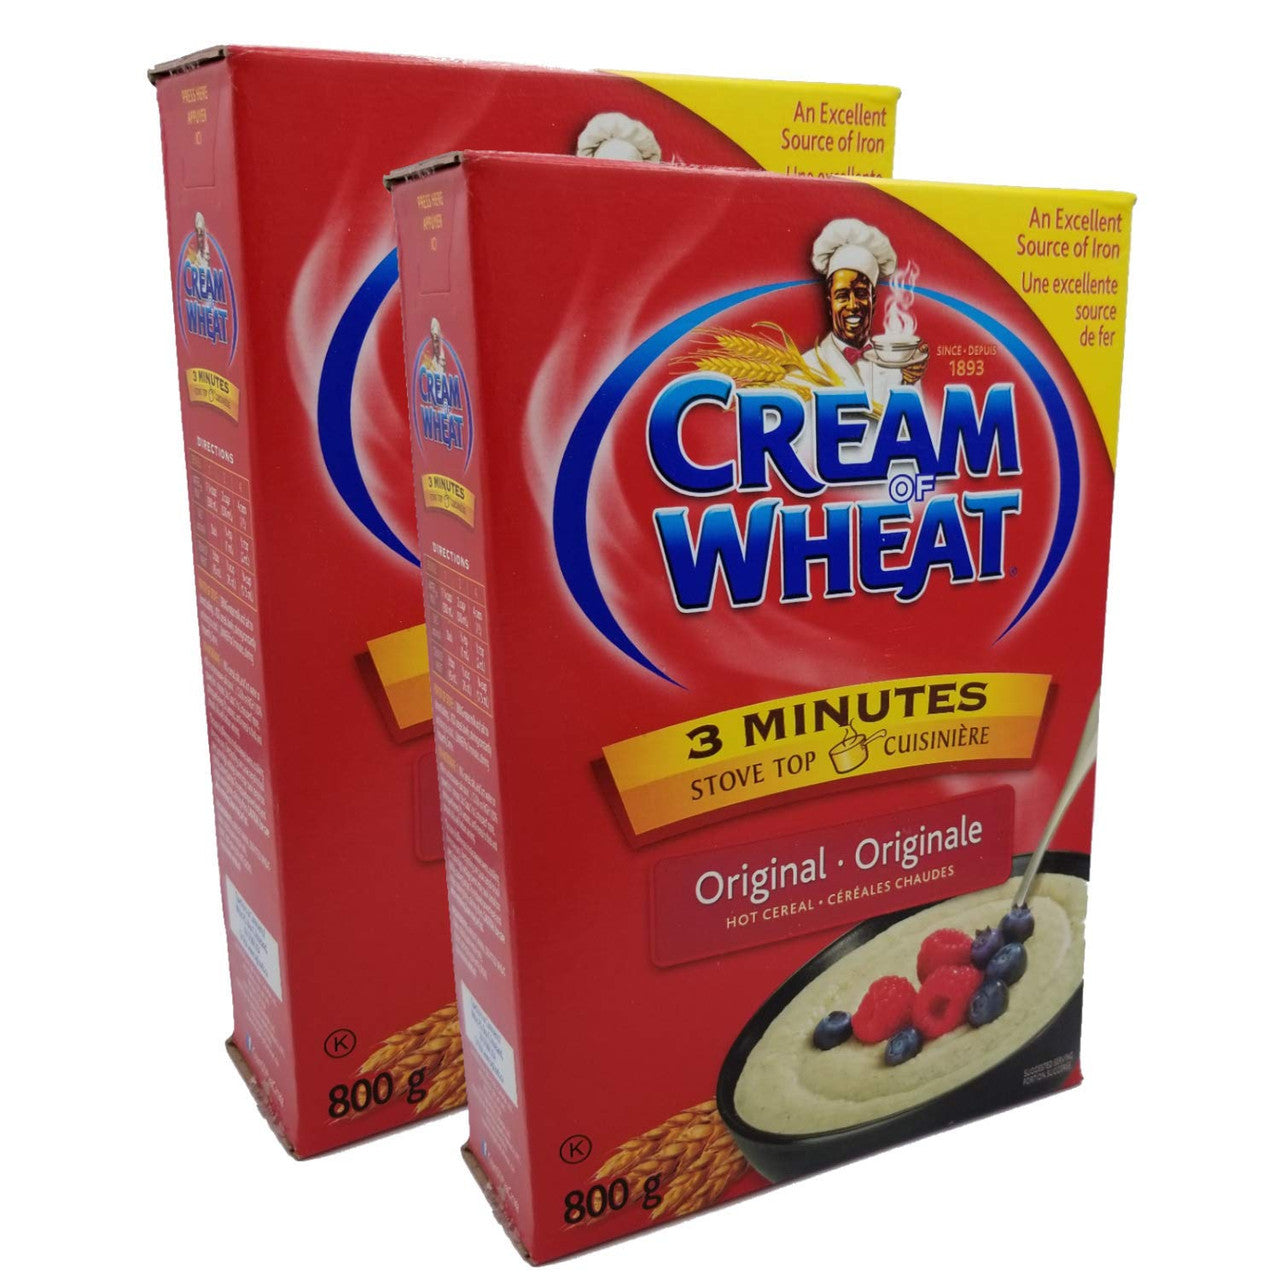 Cream of Wheat Instant Hot Cereal (Pack of 3), 36 packs - Foods Co.